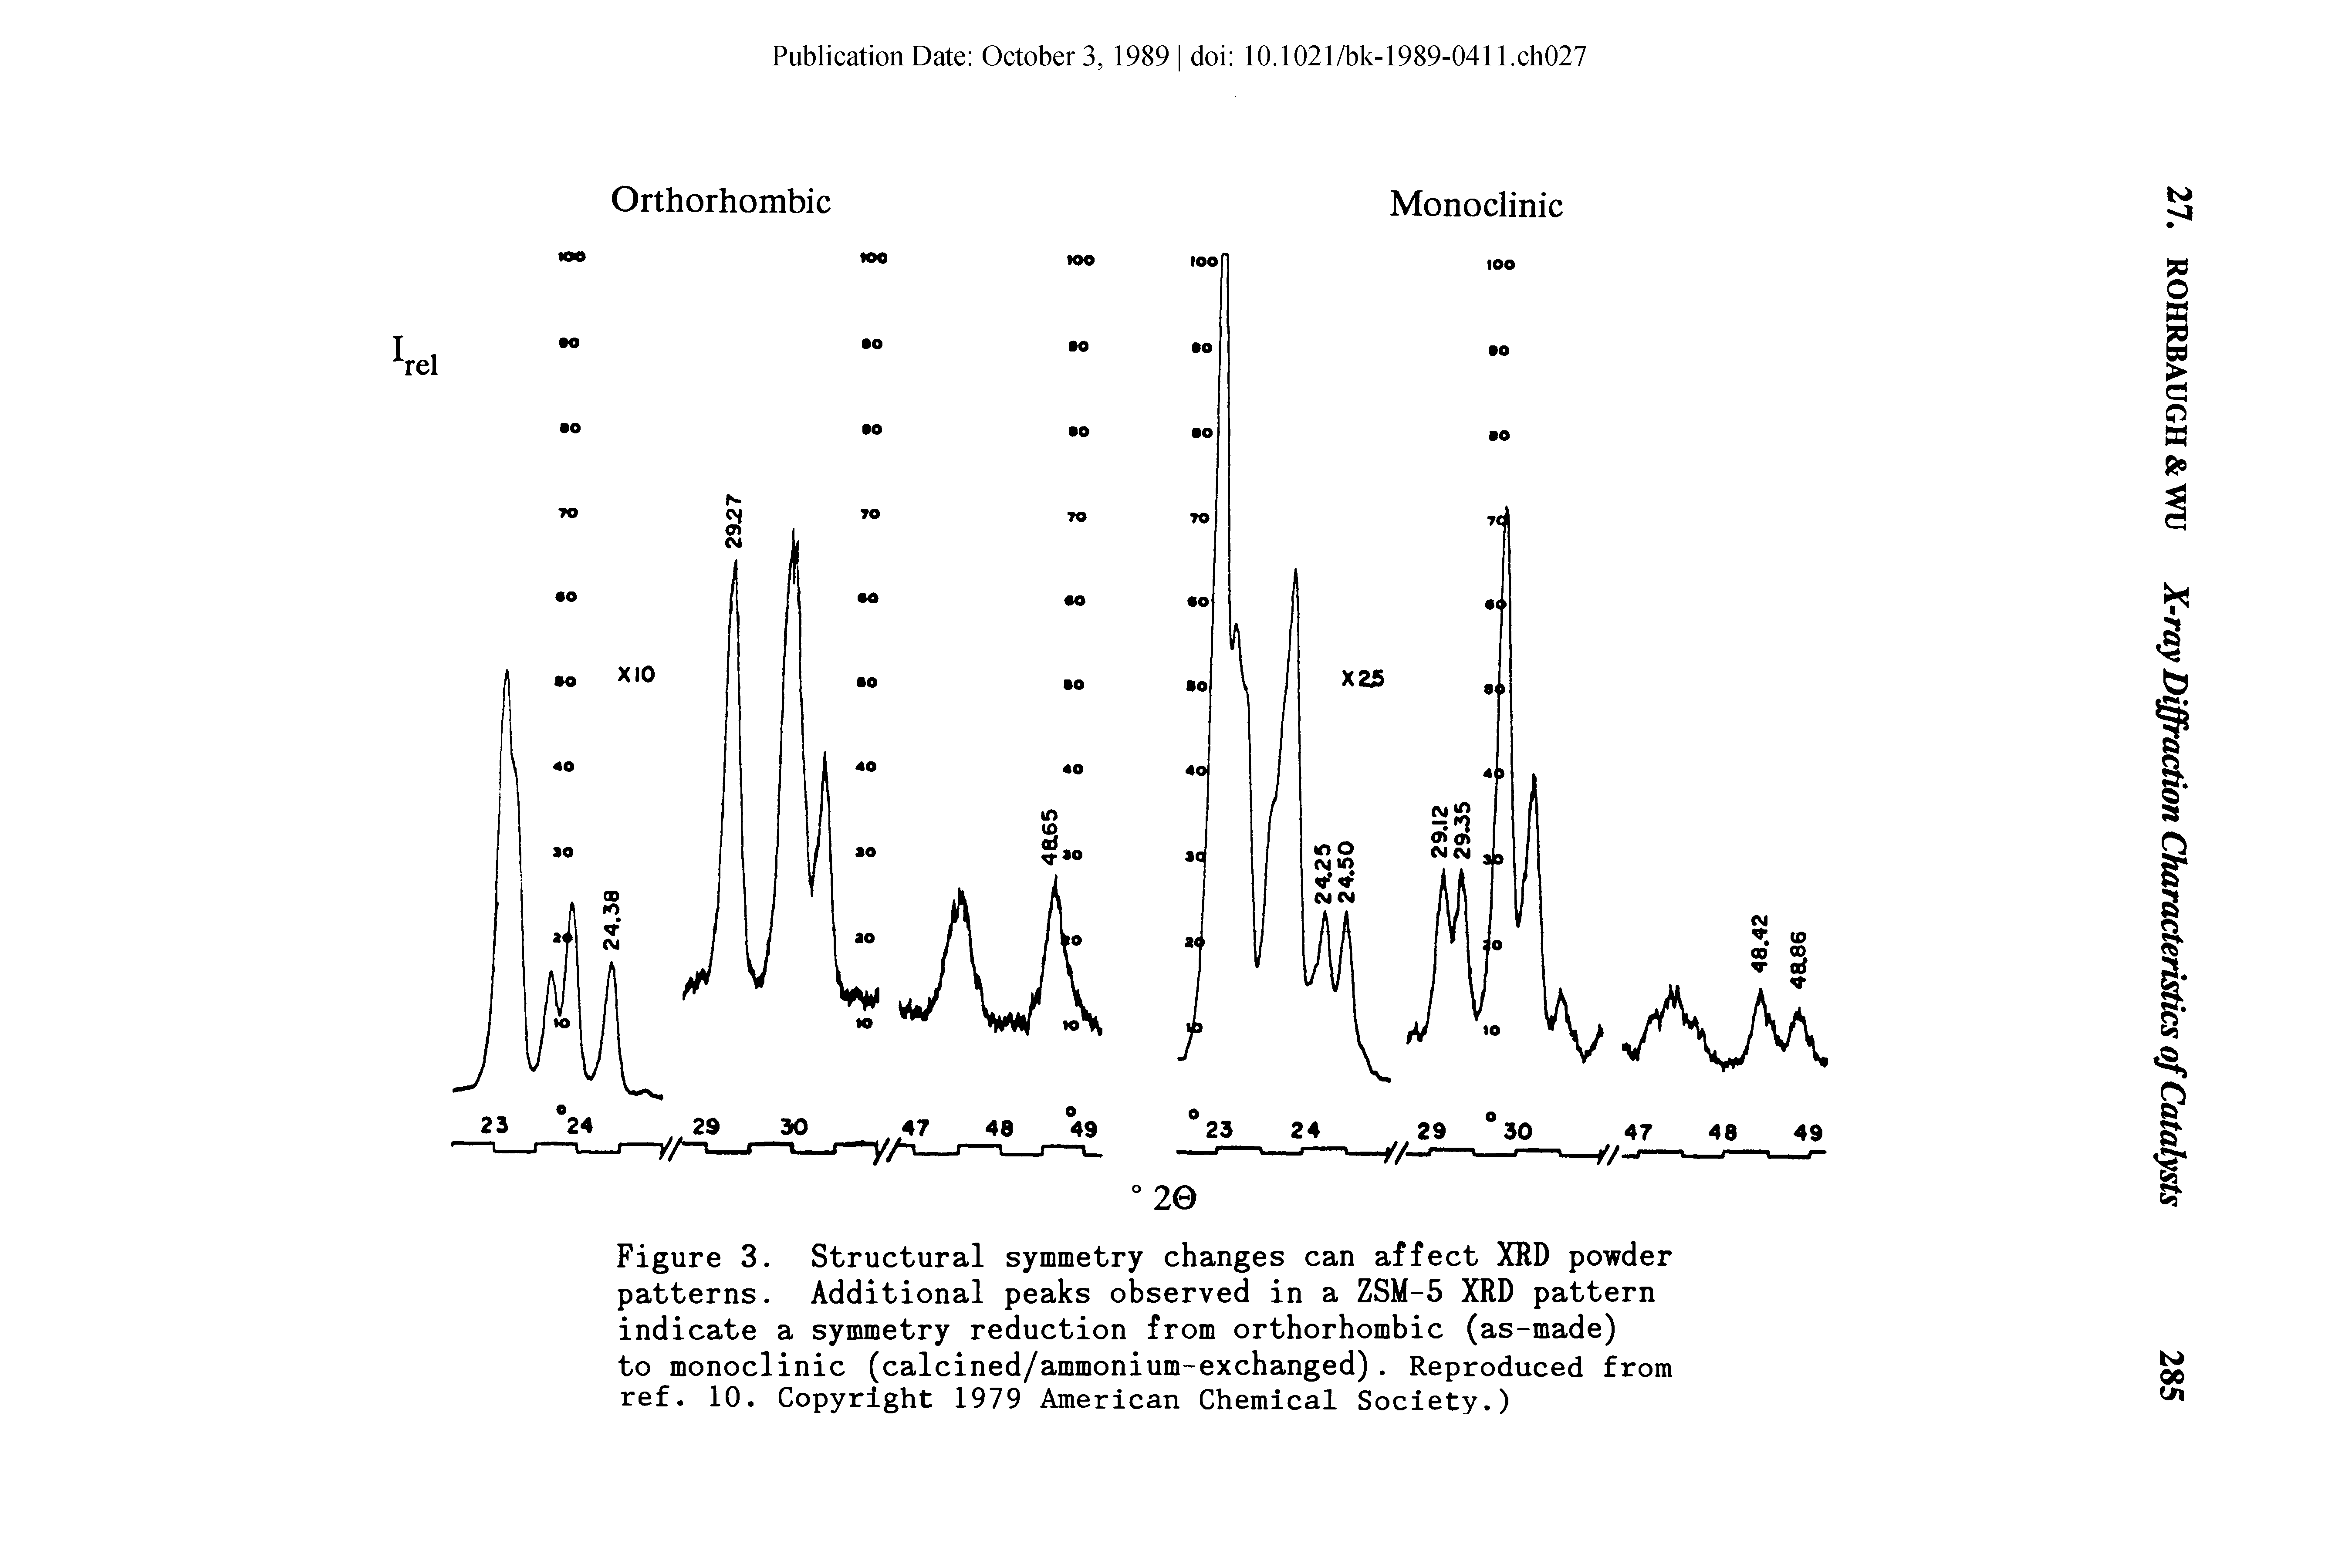 Figure 3. Structural symmetry changes can affect XRD powder patterns. Additional peaks observed in a ZSM-5 XRD pattern indicate a symmetry reduction from orthorhombic (as-made) to monoclinic (calcined/ammonium-exchanged). Reproduced from ref. 10. Copyright 1979 American Chemical Society.)...